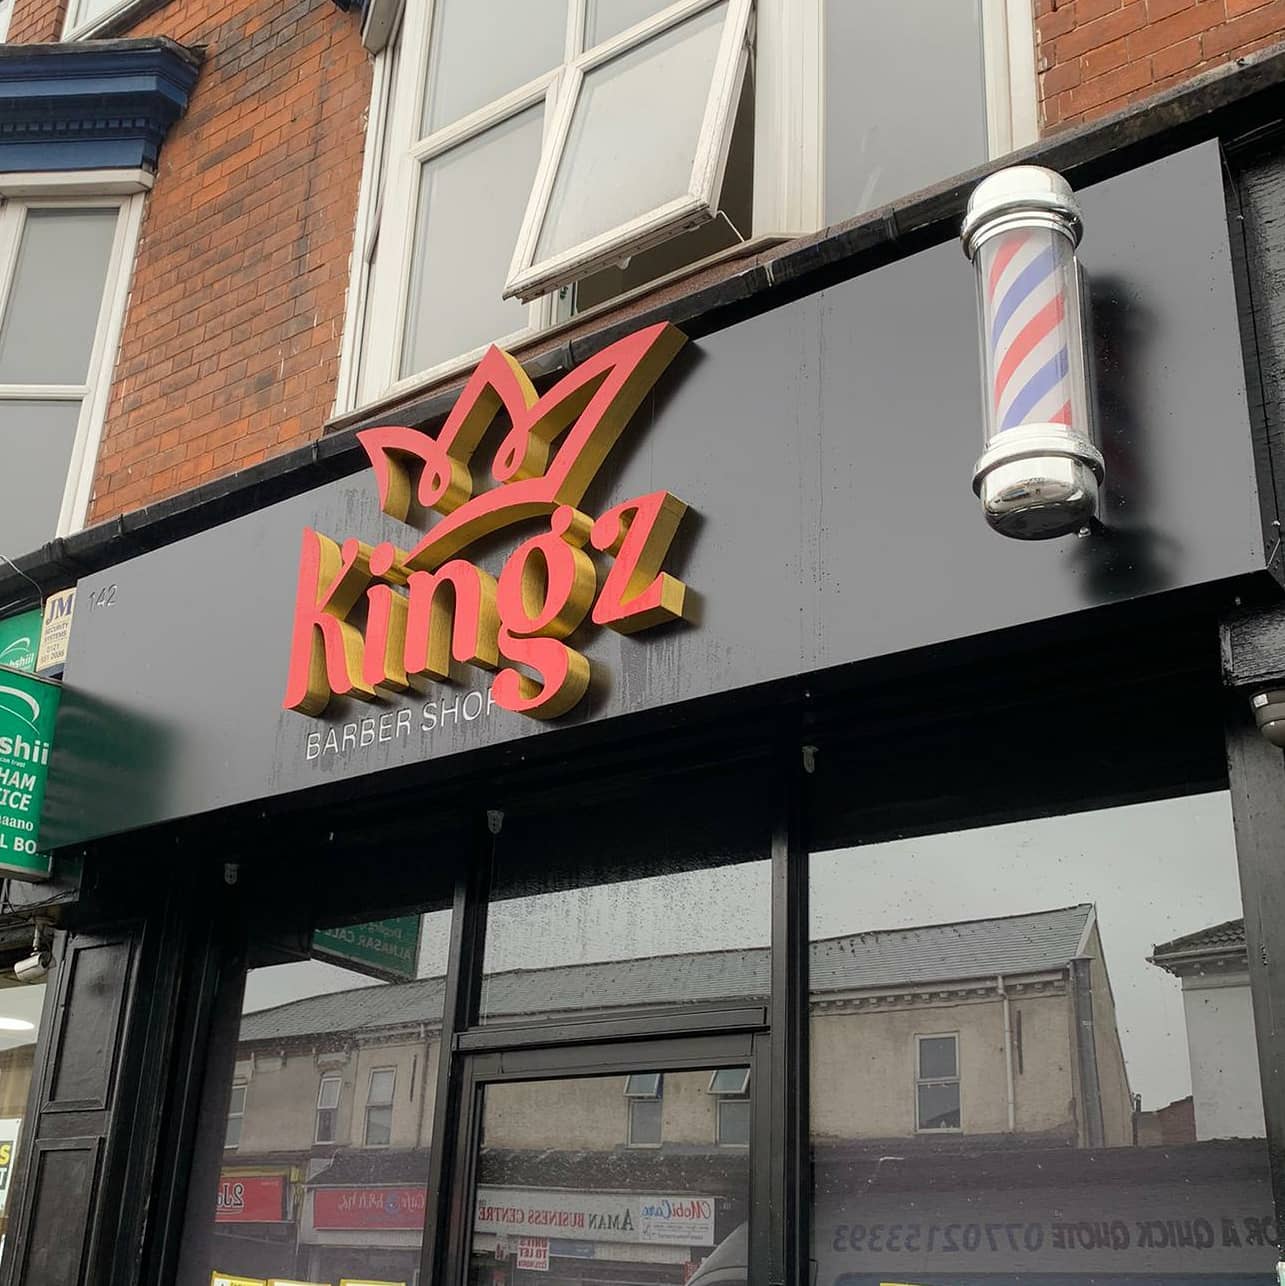 New signboard went today. This one was for @kingz_barber1 on Stratford Road, Birmingham

Check them out.

To place an order for a signboard, If at all possible PLEASE whatsapp me on 07702153393